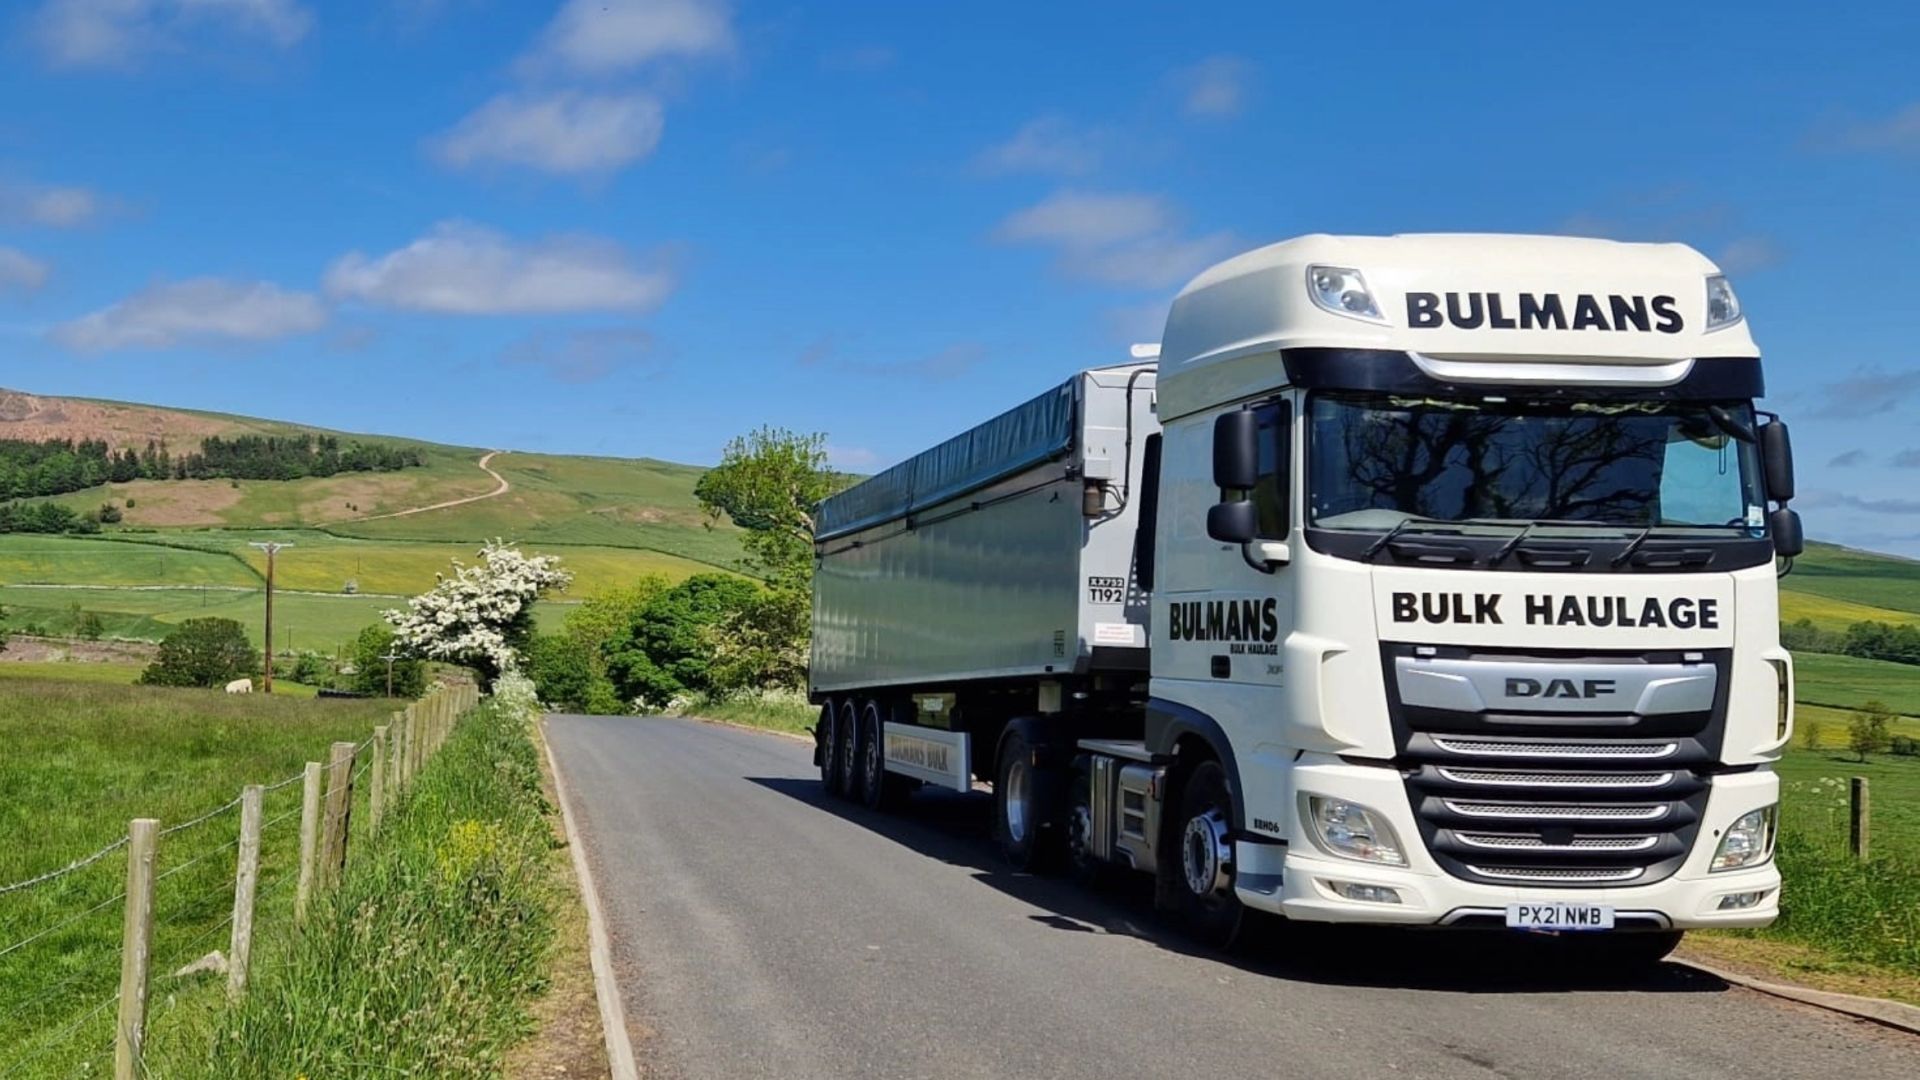 A Bulmans Bulk Haulage DAF Truck driving through the countryside on a sunny day, in the English Lake District.